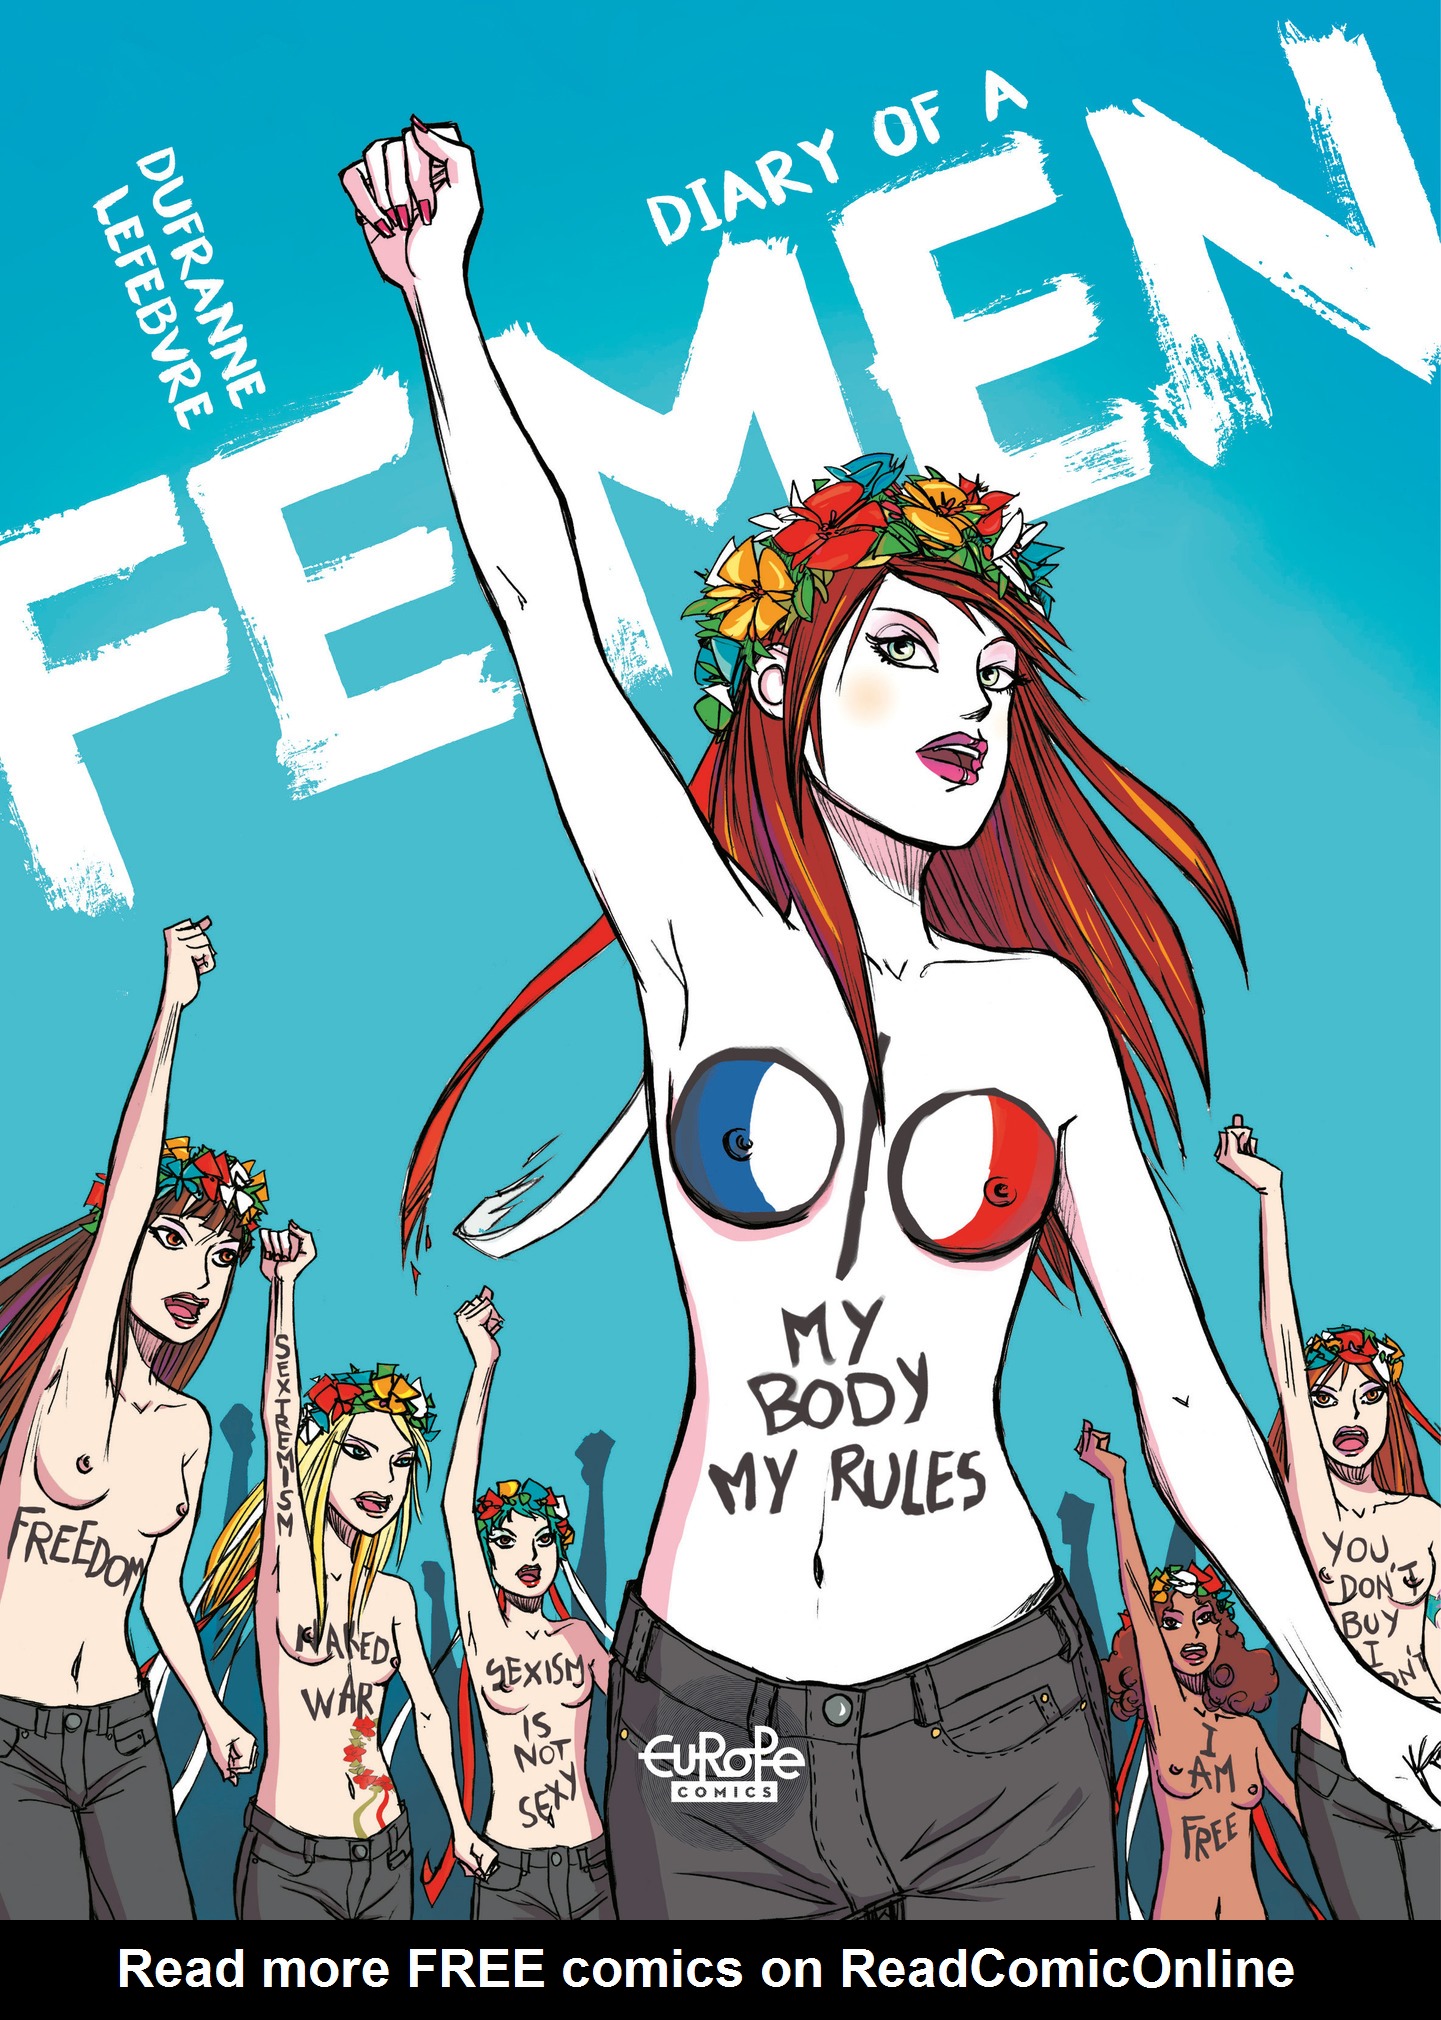 Read online Diary of A Femen comic -  Issue # TPB - 1